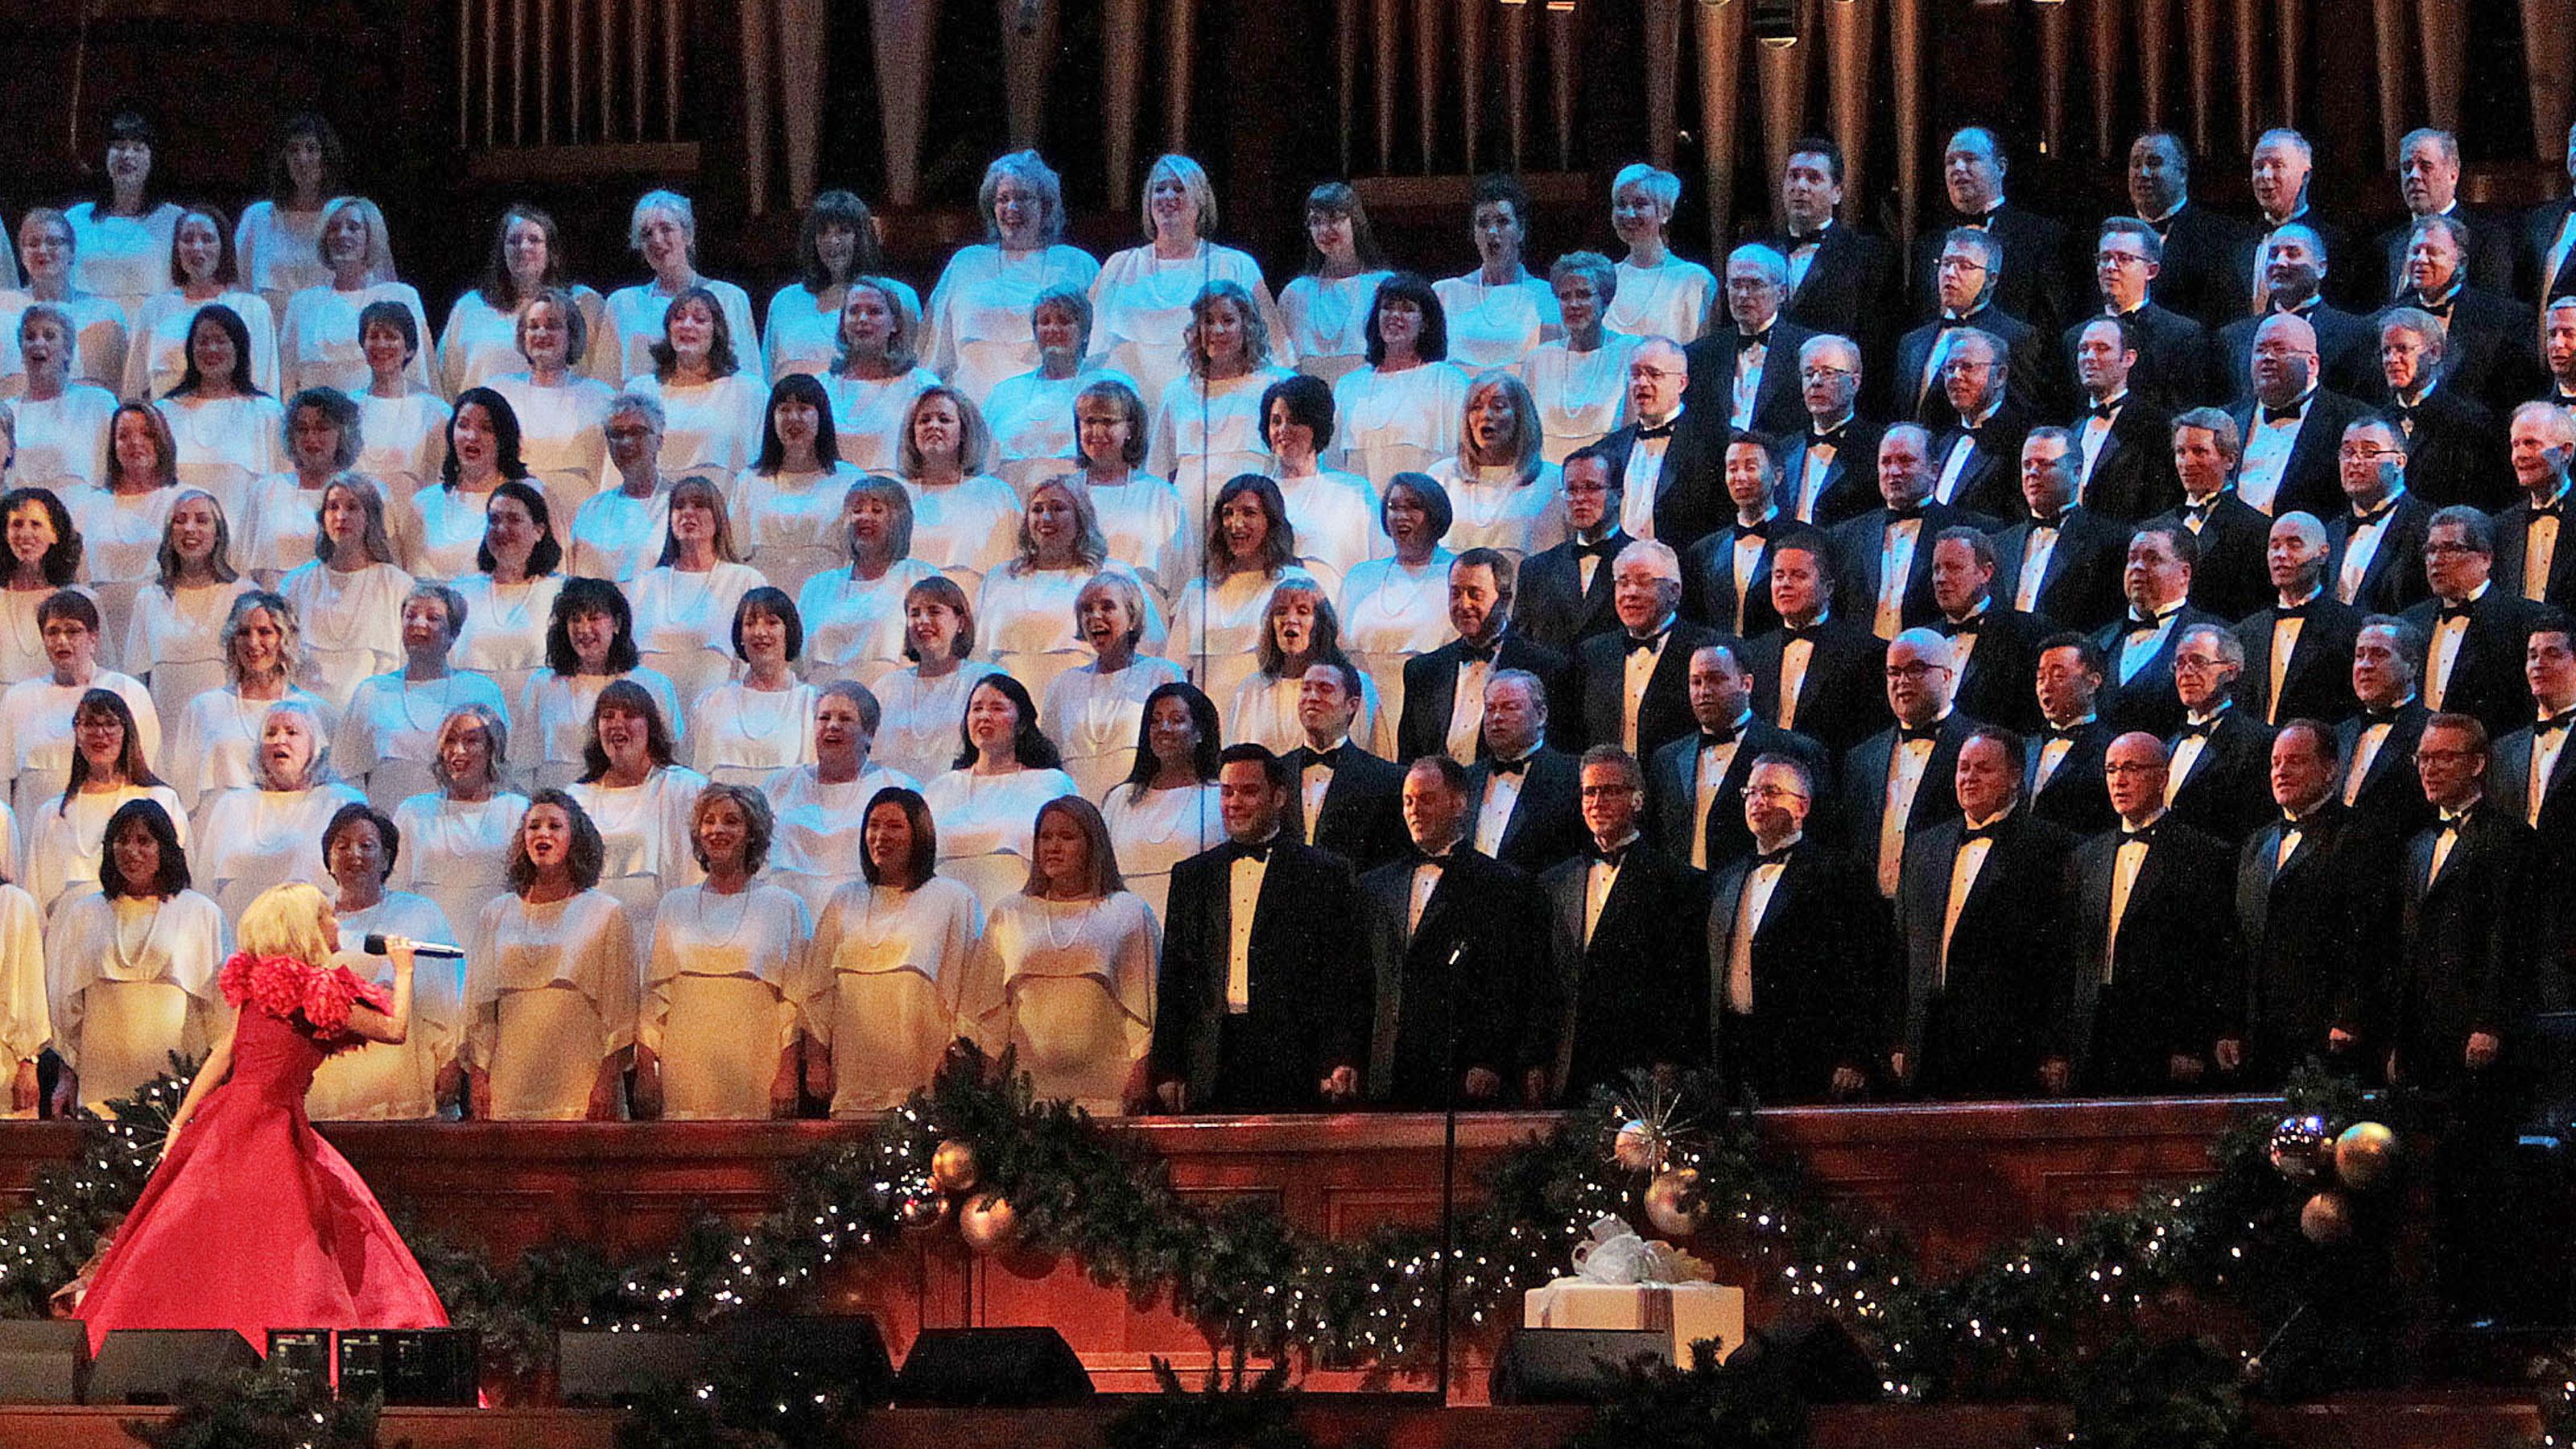 Kristin Chenoweth sings into a microphone while facing The Tabernacle Choir.